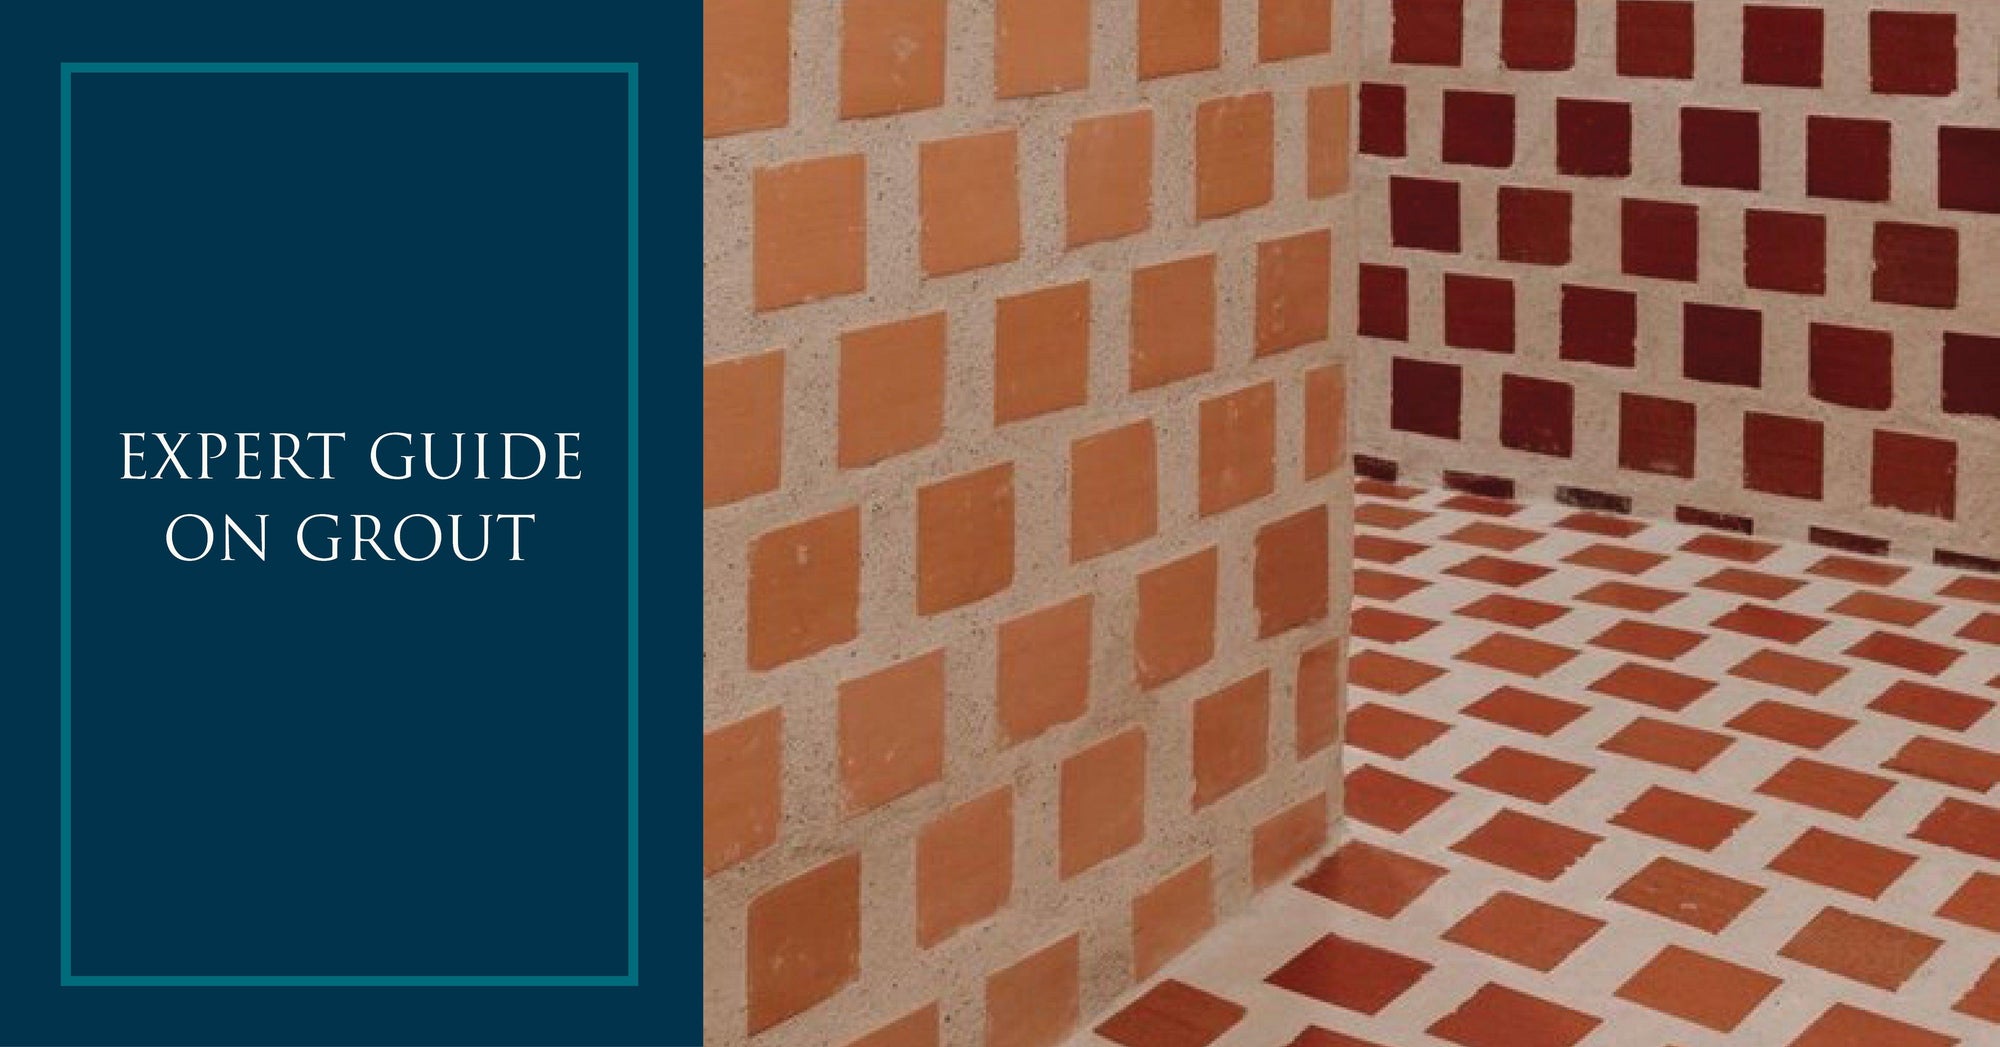 Expert Guide on Grout